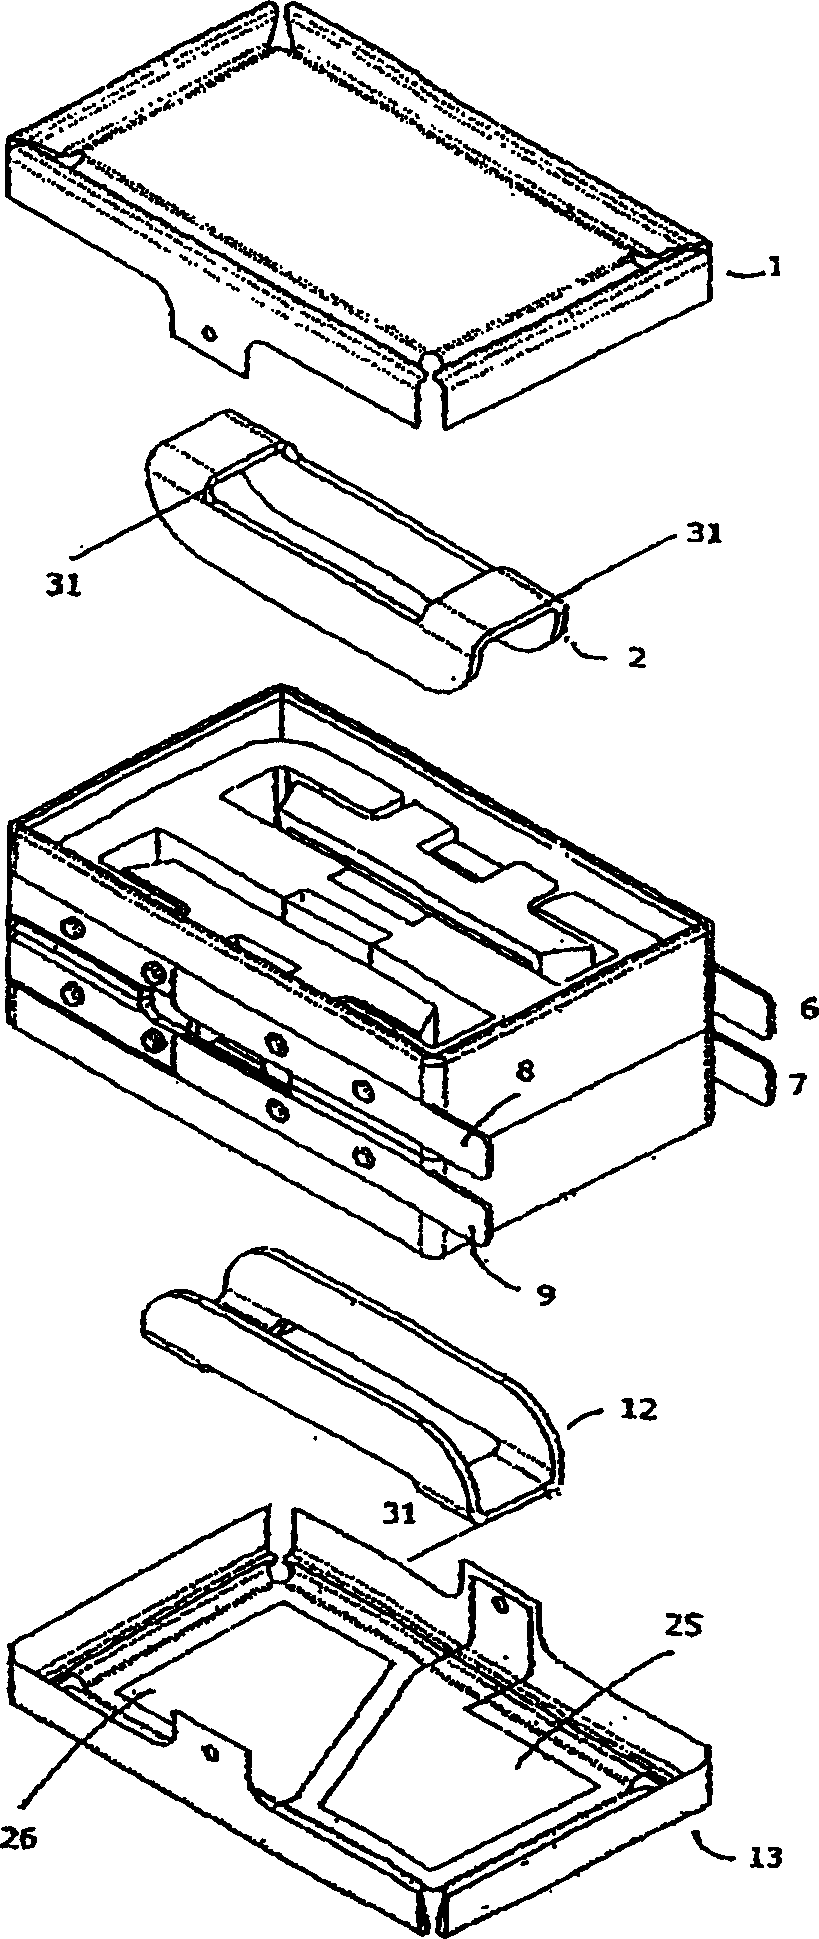 An electro-acoustic transducer with two diaphragms